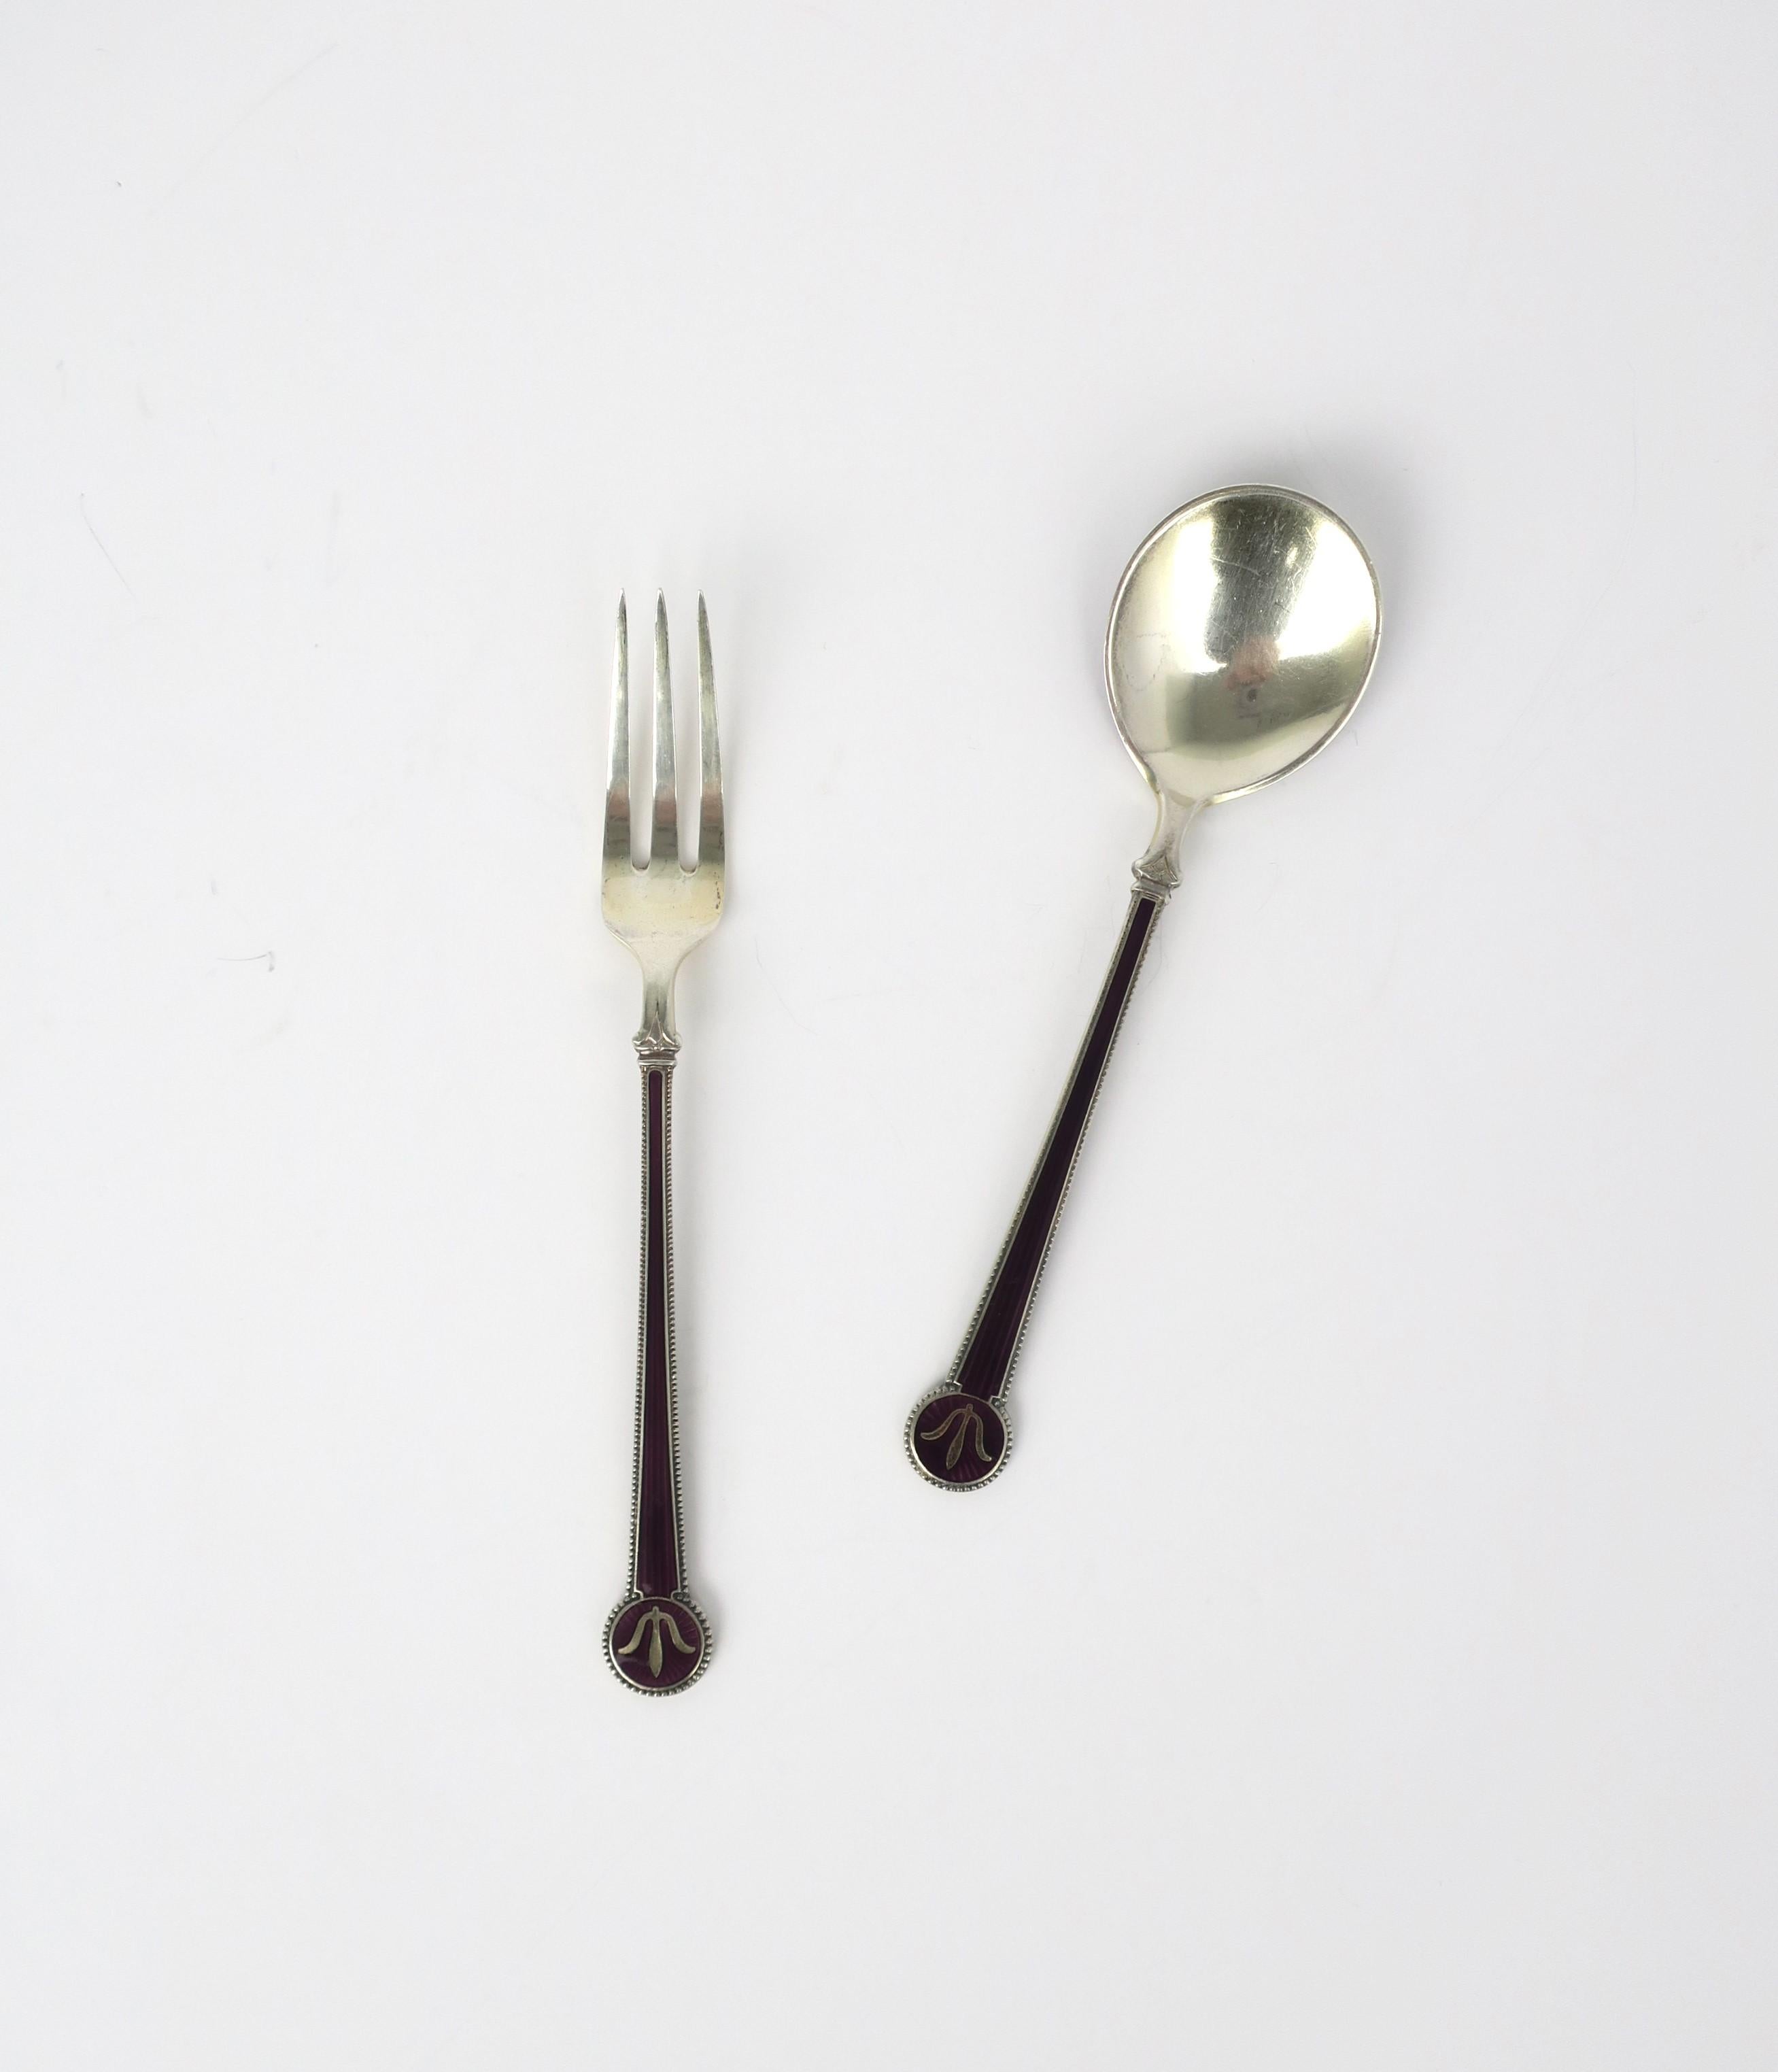 A beautiful and fine set of sterling silver and purple eggplant enamel guilloche appetizer fork and spoon from Norwegian designer and silversmith, David Andersen, circa early-20th century, Norway. The quality of the guilloche enamel and sterling